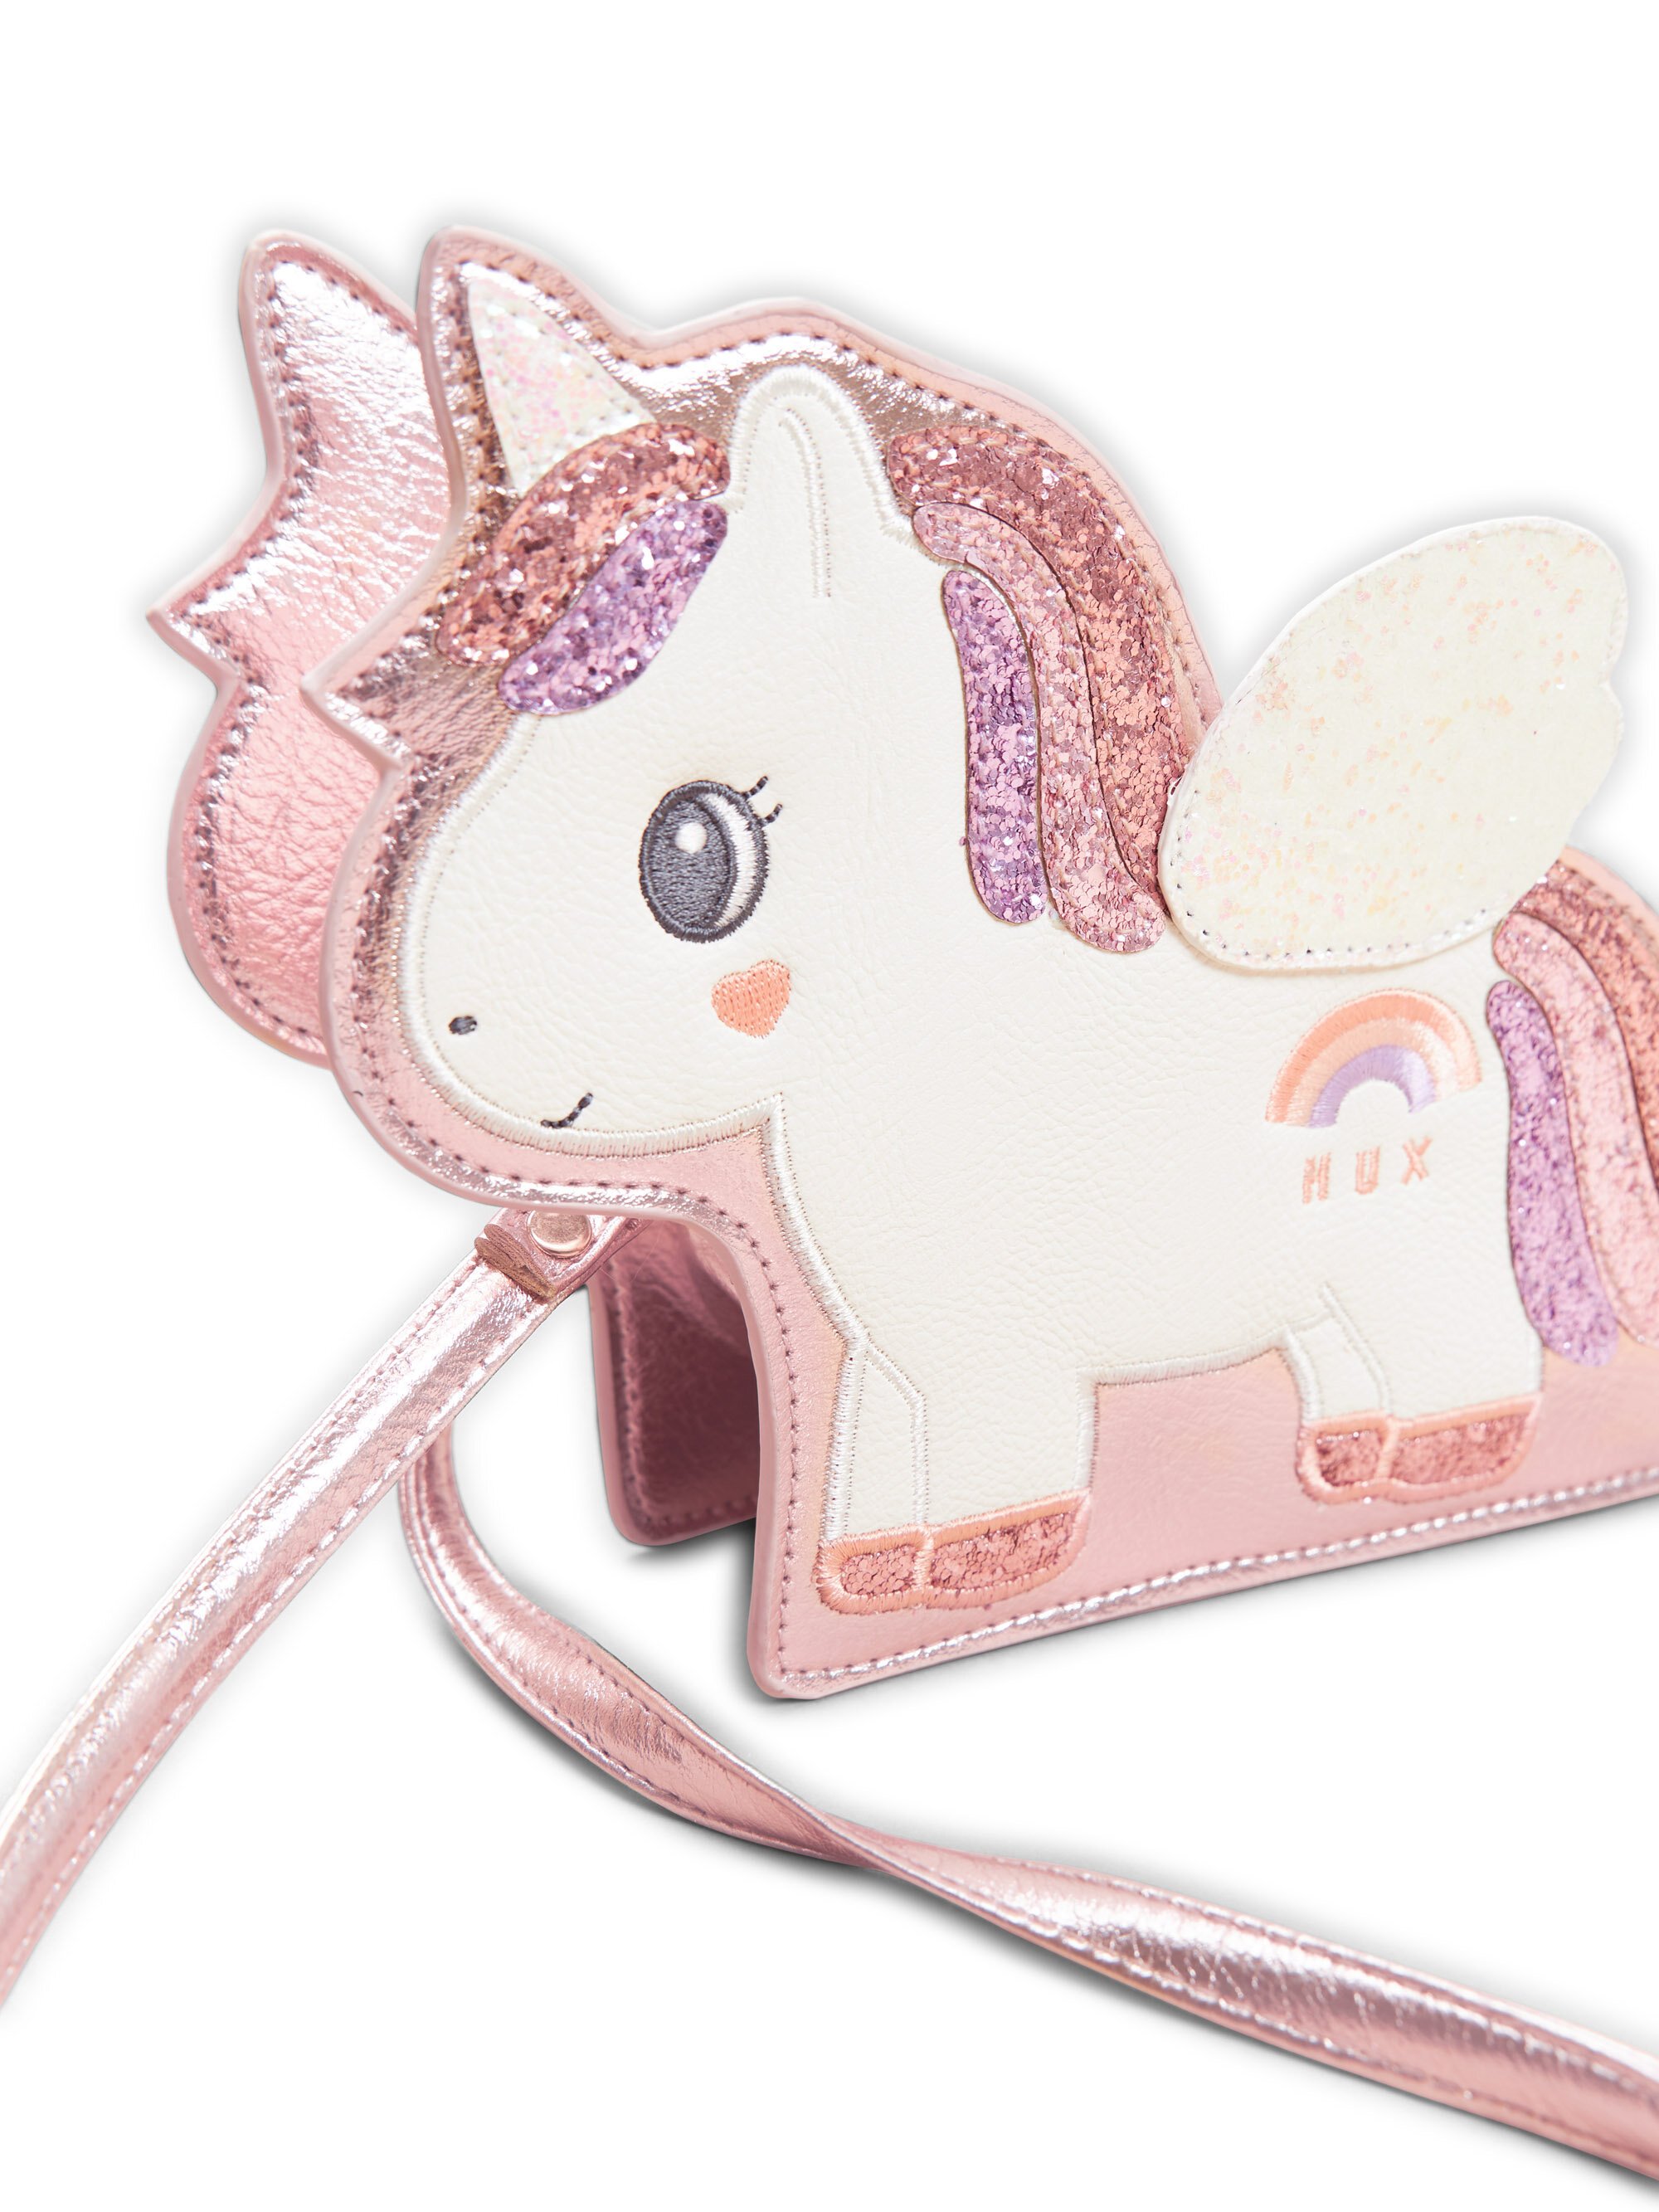 Little Girls Kids Cute Purses Puppy Crossbody Shoulder Bag Coin Purse  Toddlers Handbag : Amazon.in: Clothing & Accessories